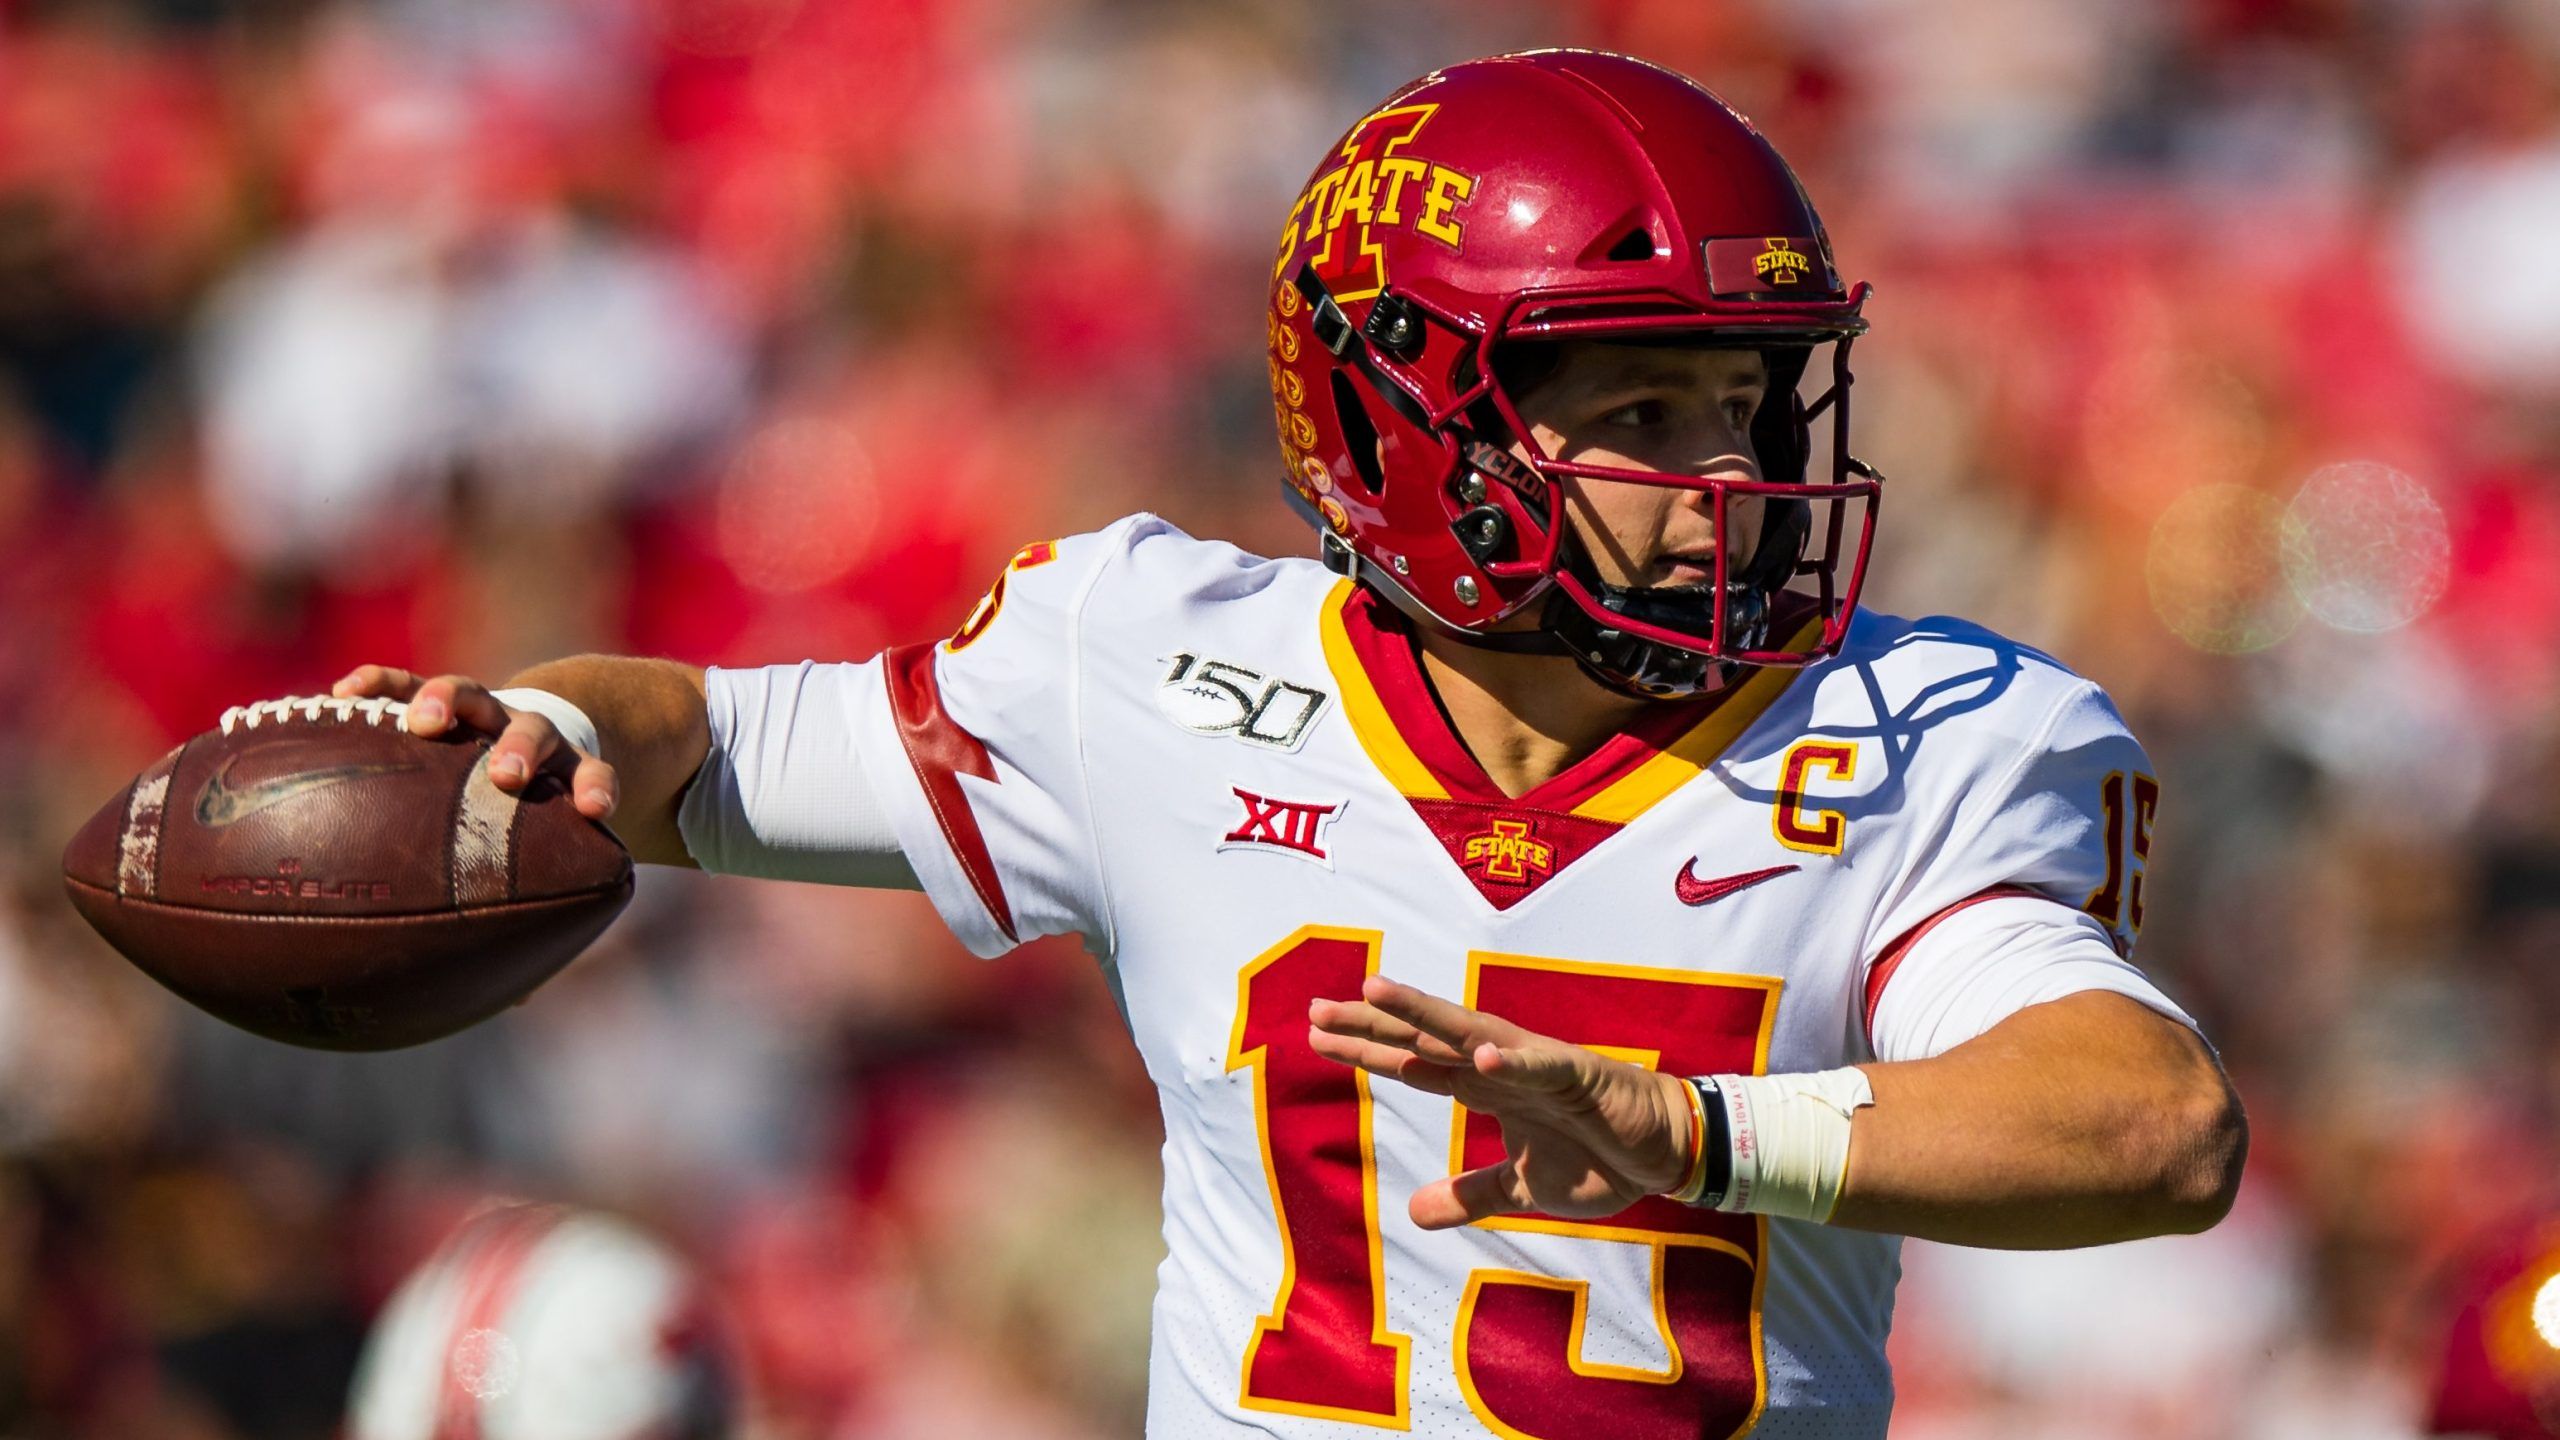 Iowa State Cyclones Set 2020 Football Schedule; Thursday Night Game Included